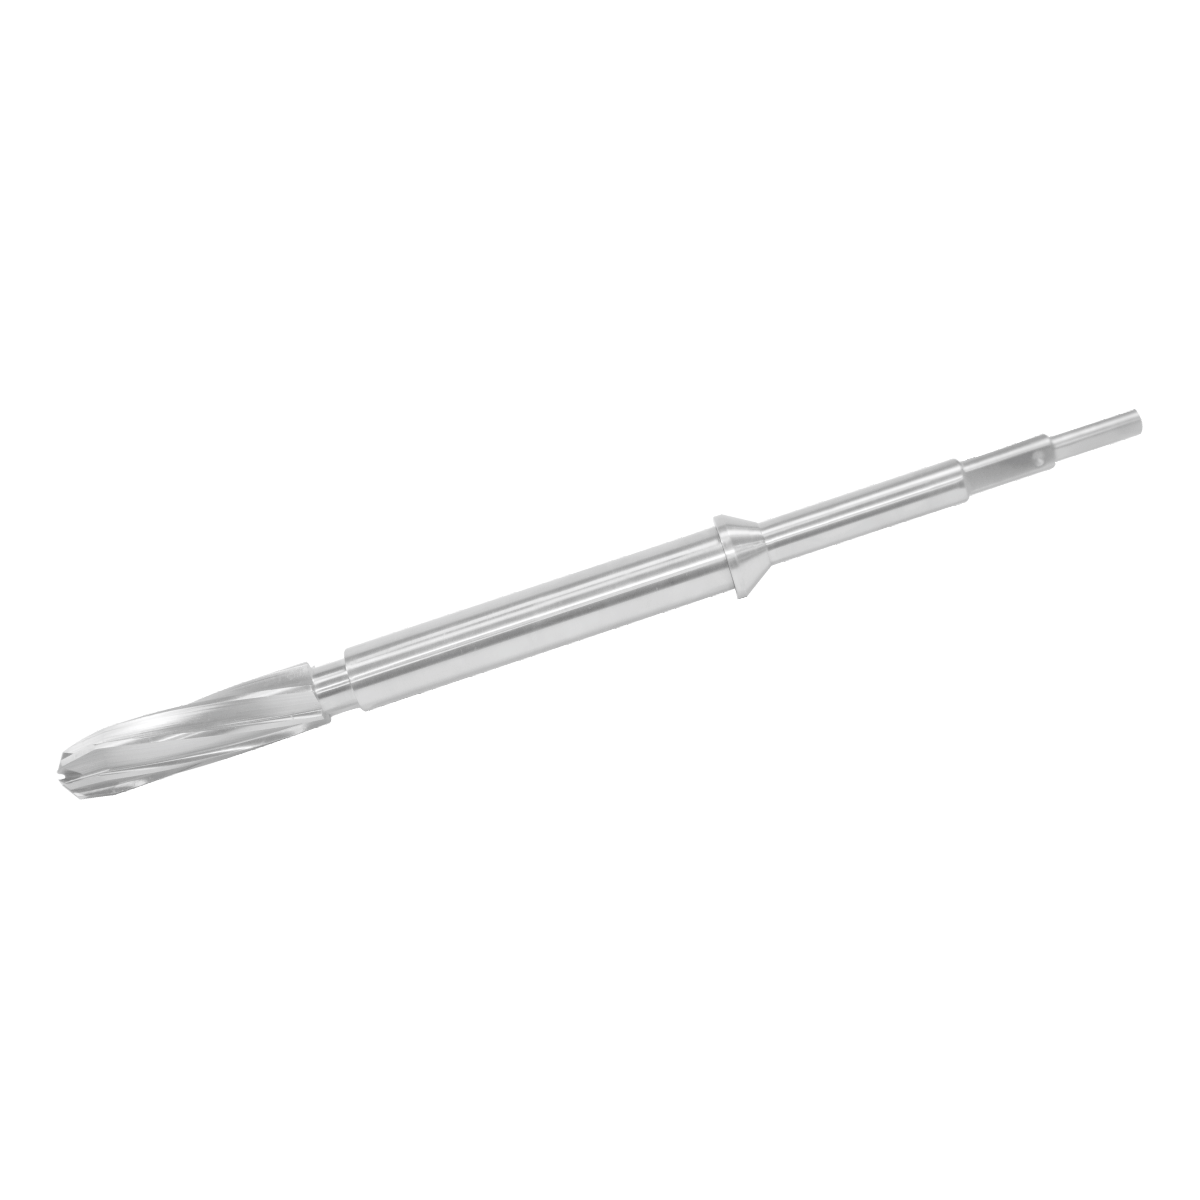 Proximal Cannulated Reamer 15mm for TFN/PFN